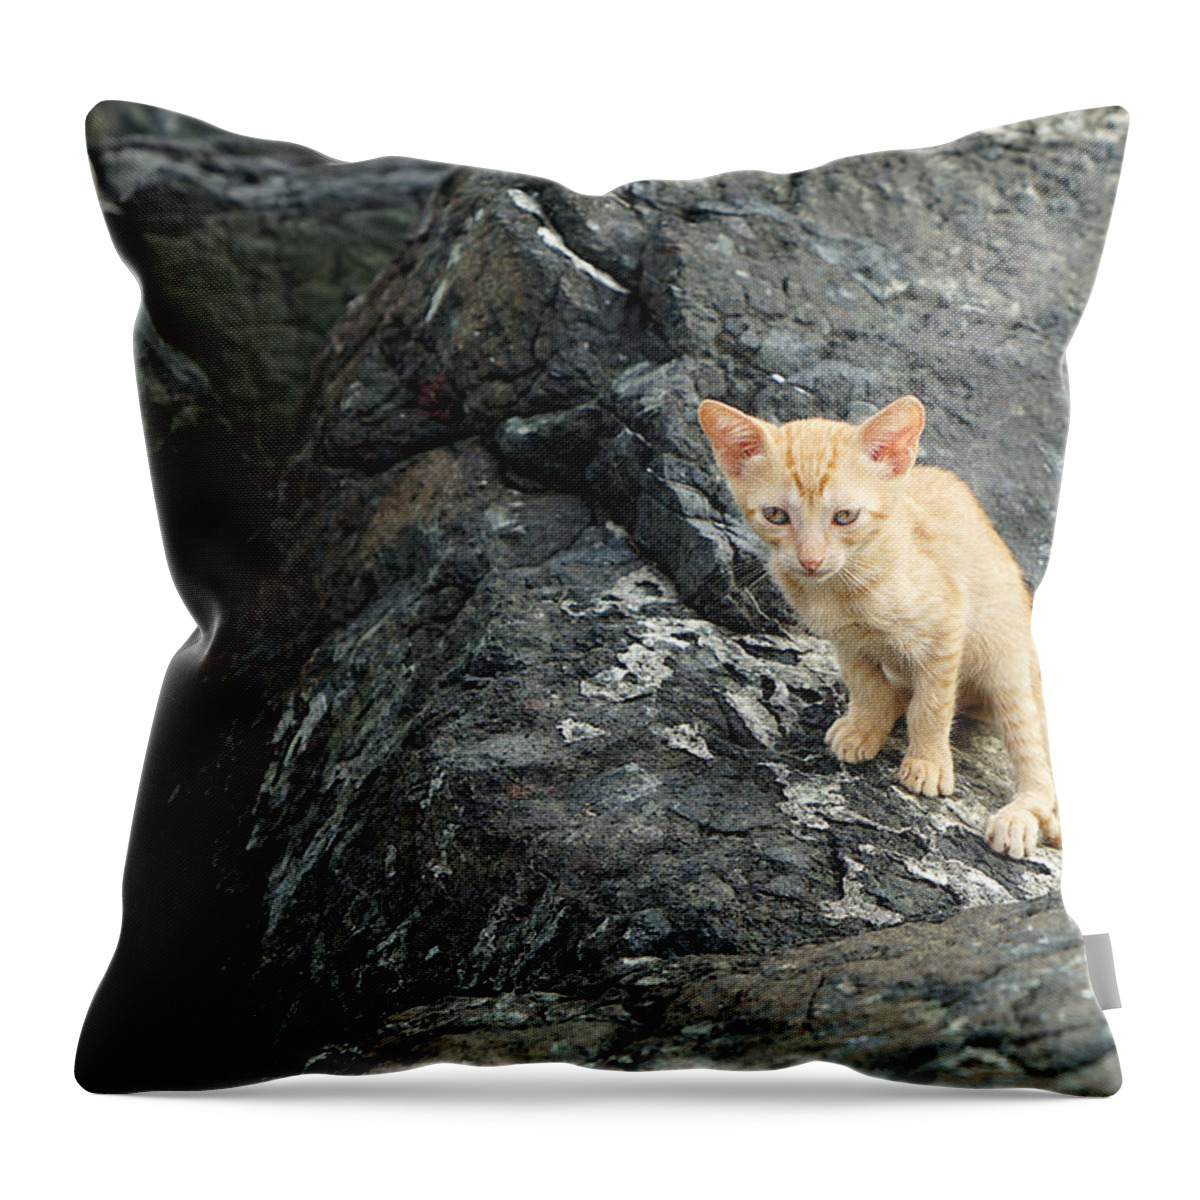 Richard Reeve Throw Pillow featuring the photograph Shoreline Kitten by Richard Reeve